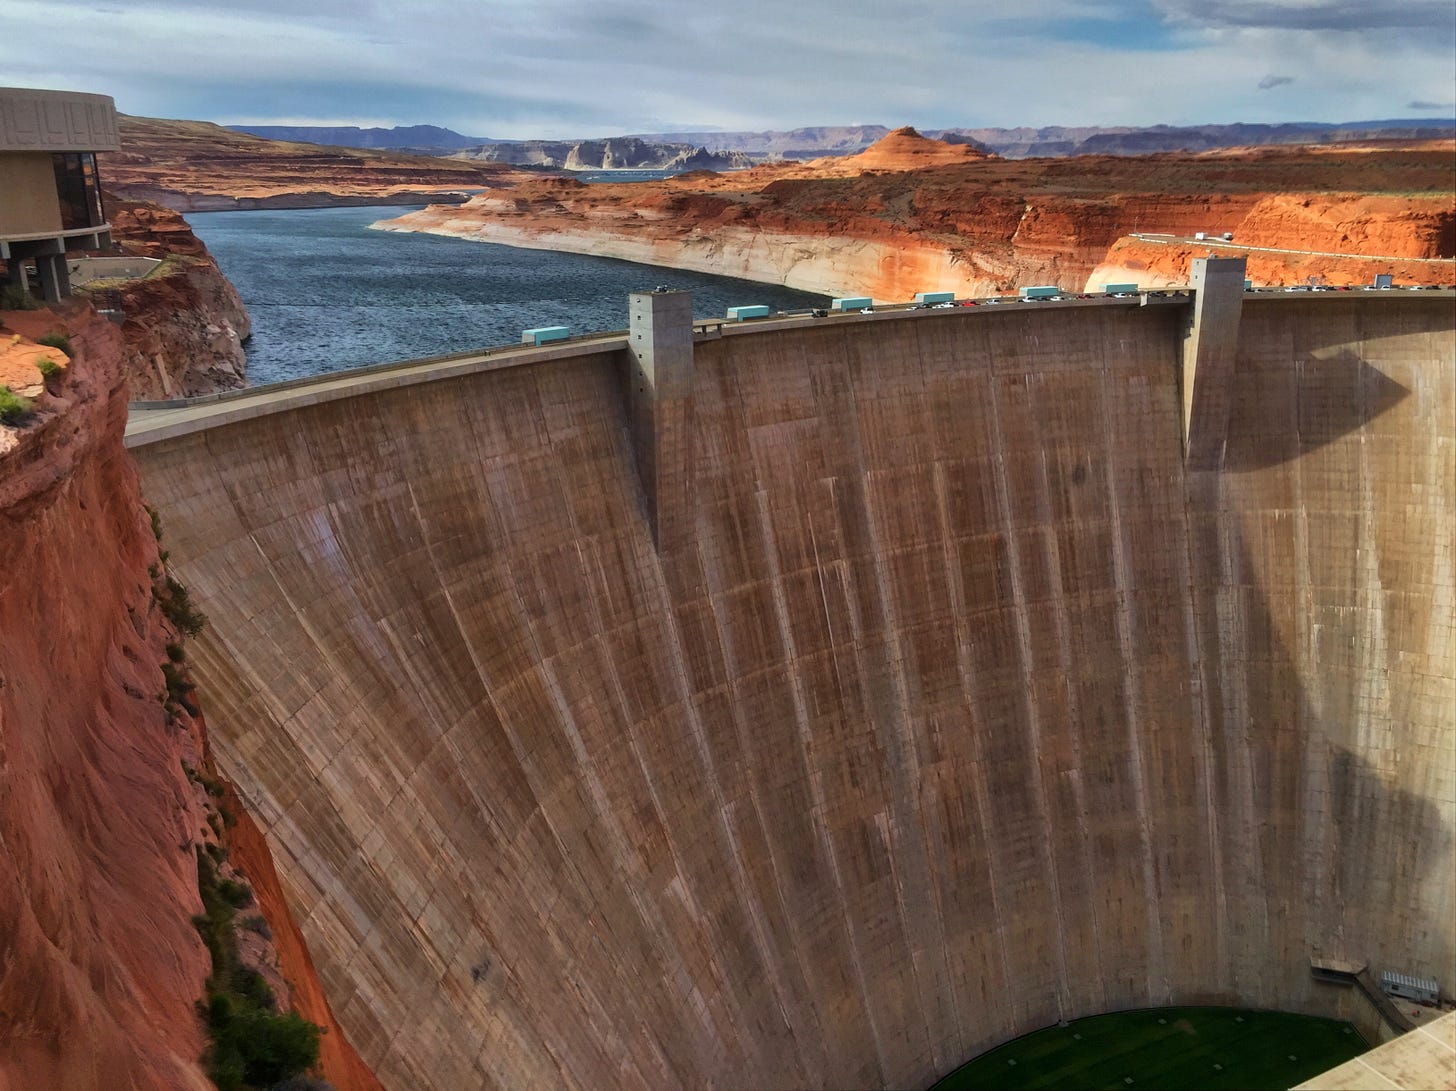 Glen Canyon Dam in 2018, photo by Alexander Verbeek for the planet.substack.com